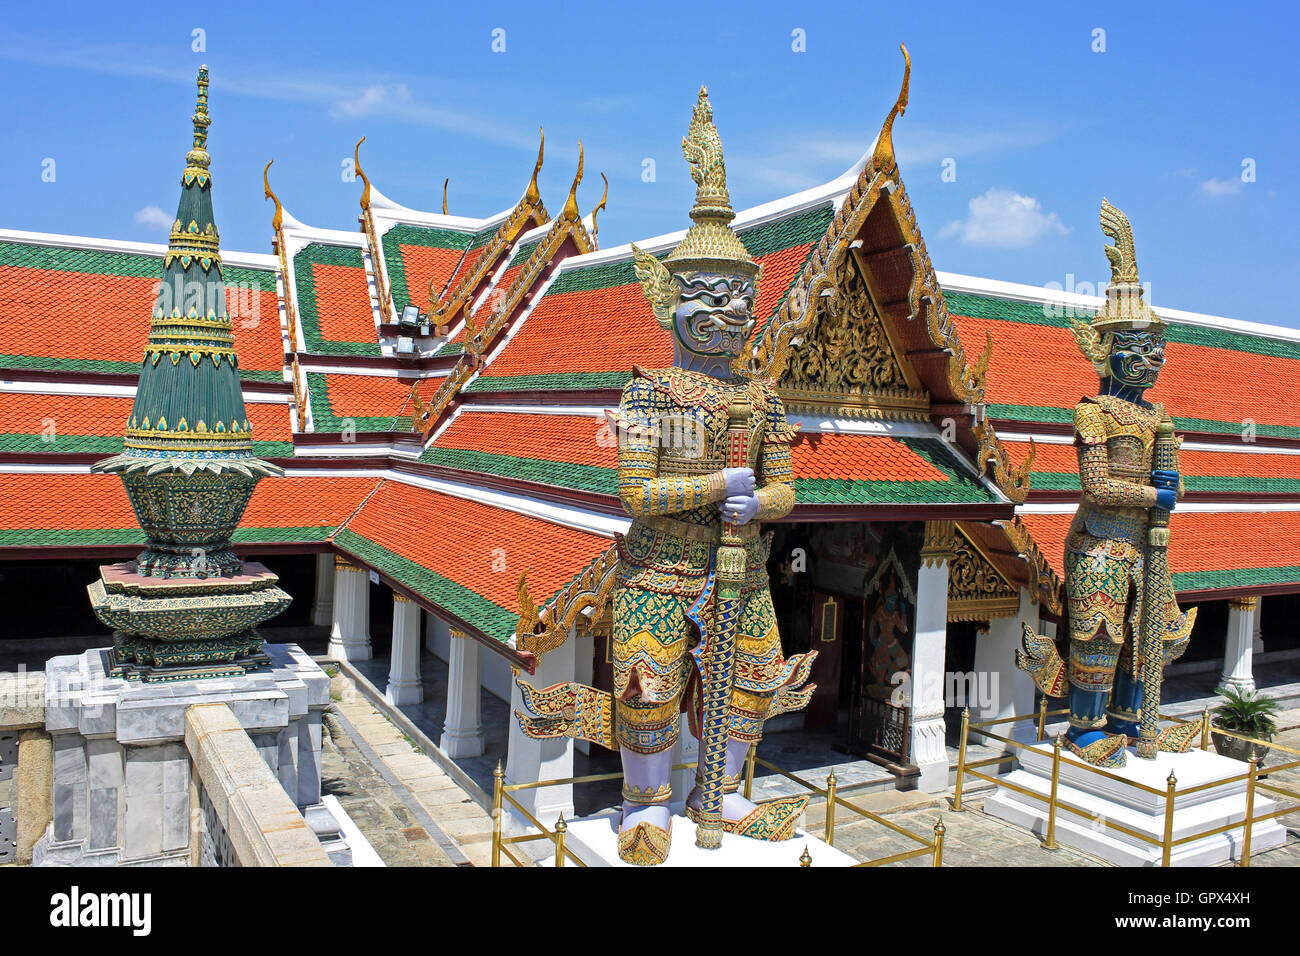 Wat Phra Kaew gate is guarded by a pair of yakshas statues, mythical giants measuring 5 metres (16 ft) high. Grand Palace Bangkok Thailand Stock Photo